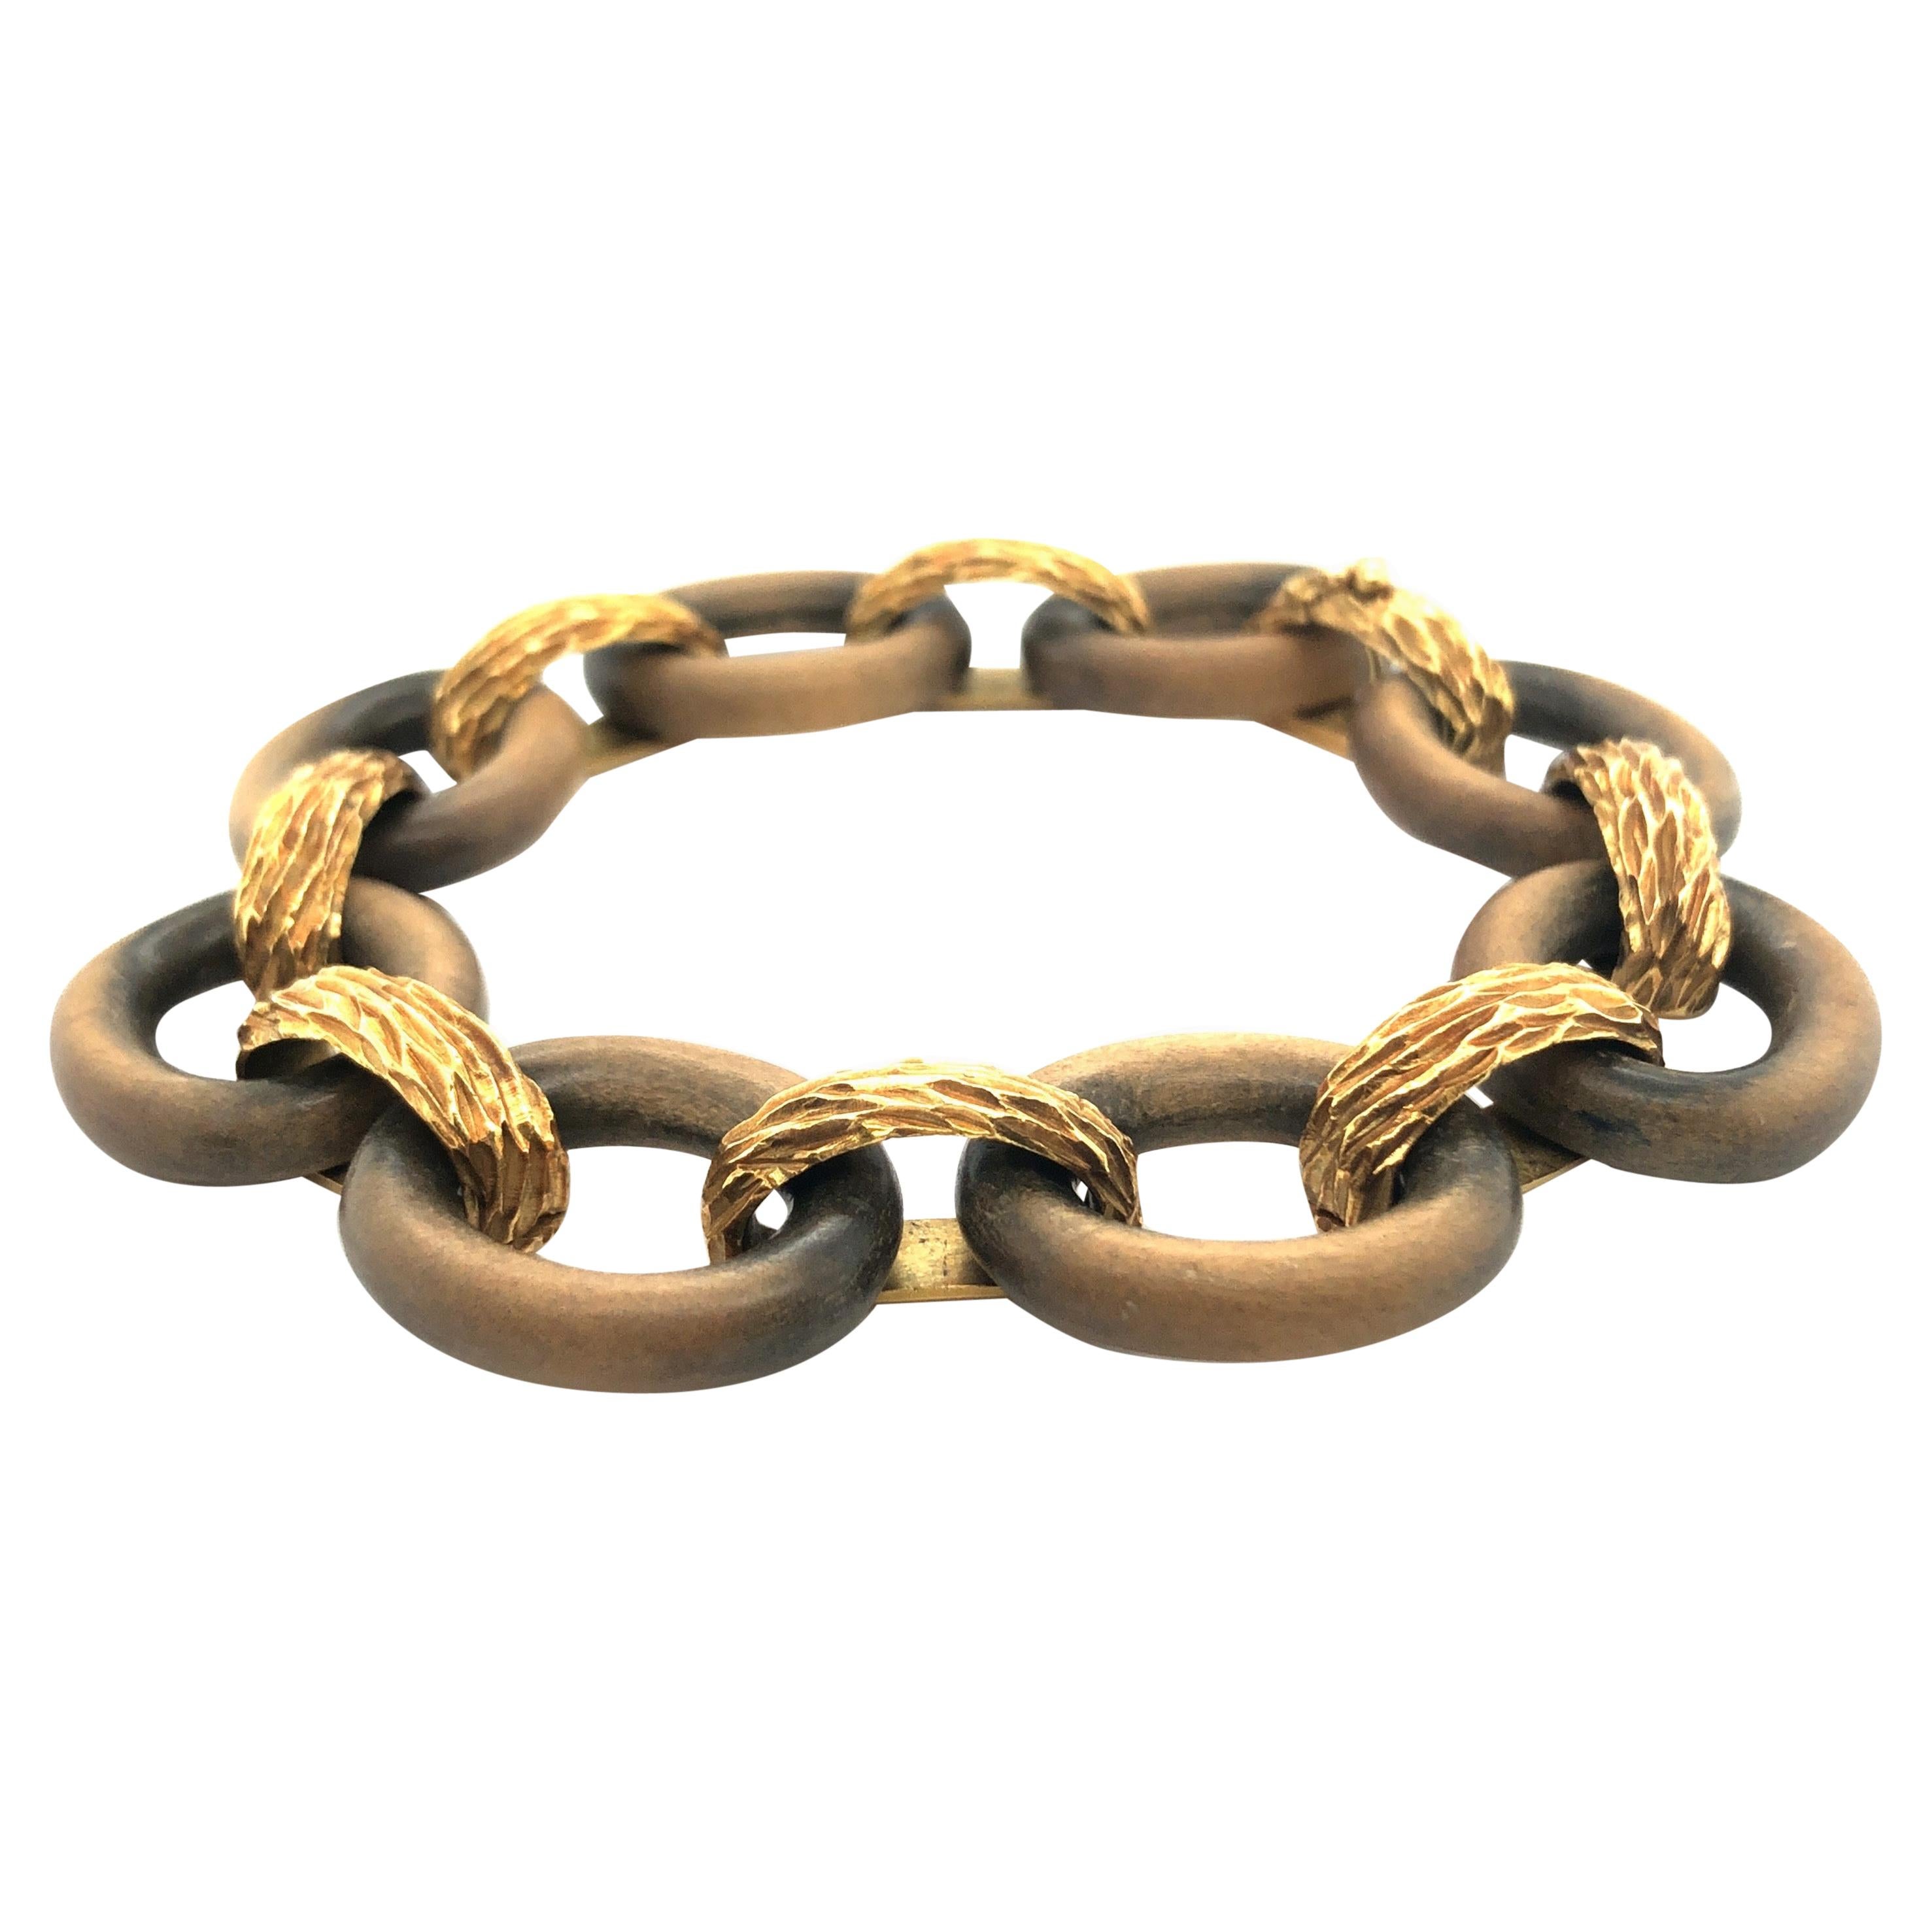 18 karat yellow gold and sandalwood vintage bracelet by René Boivin, consisting of 8 oval rings of polished sandalwood joined together by structured yellow gold links. The bracelet fastens with a secure clasp disguised within the final link. A